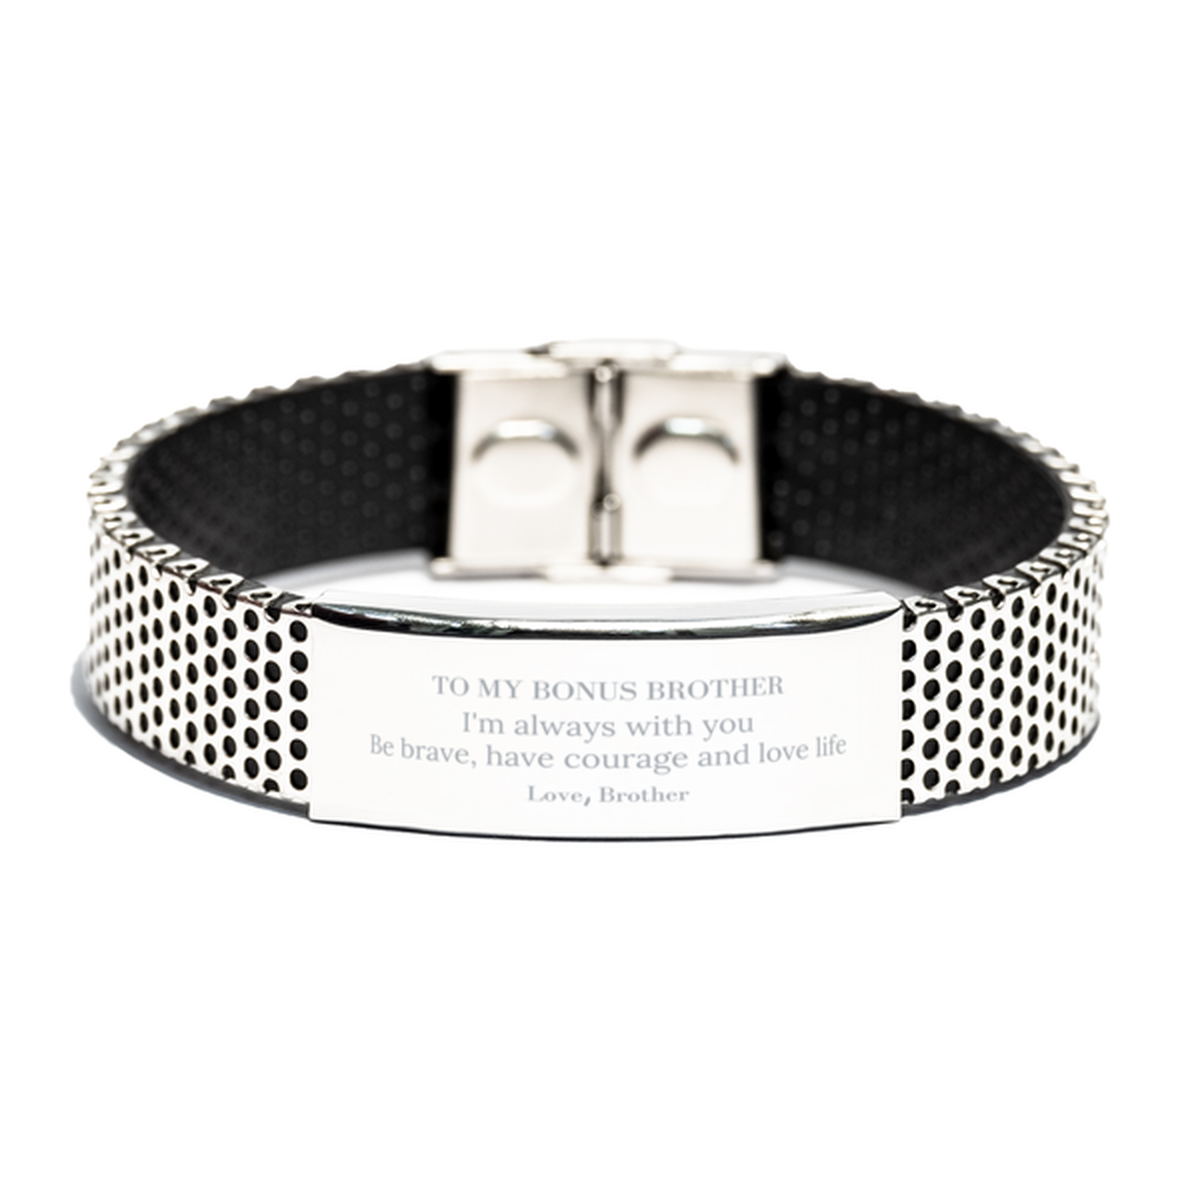 To My Bonus Brother Gifts from Brother, Unique Stainless Steel Bracelet Inspirational Christmas Birthday Graduation Gifts for Bonus Brother I'm always with you. Be brave, have courage and love life. Love, Brother